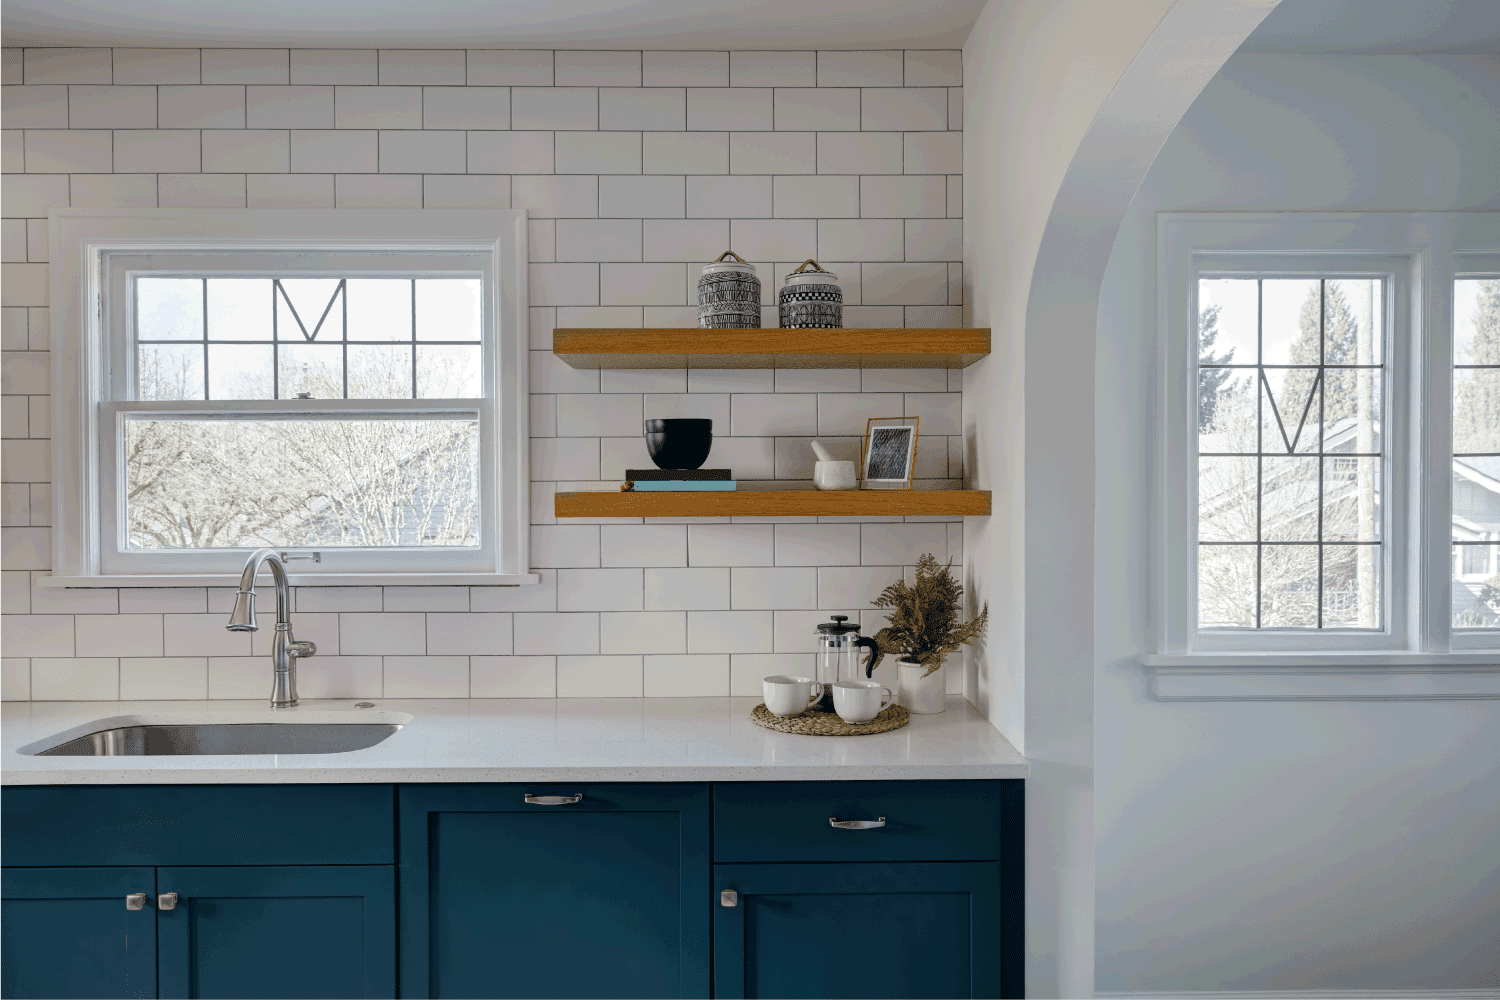 An elegant minimalist styled kitchen with white subway tiles, a window to look out and white countertops filed with decoration